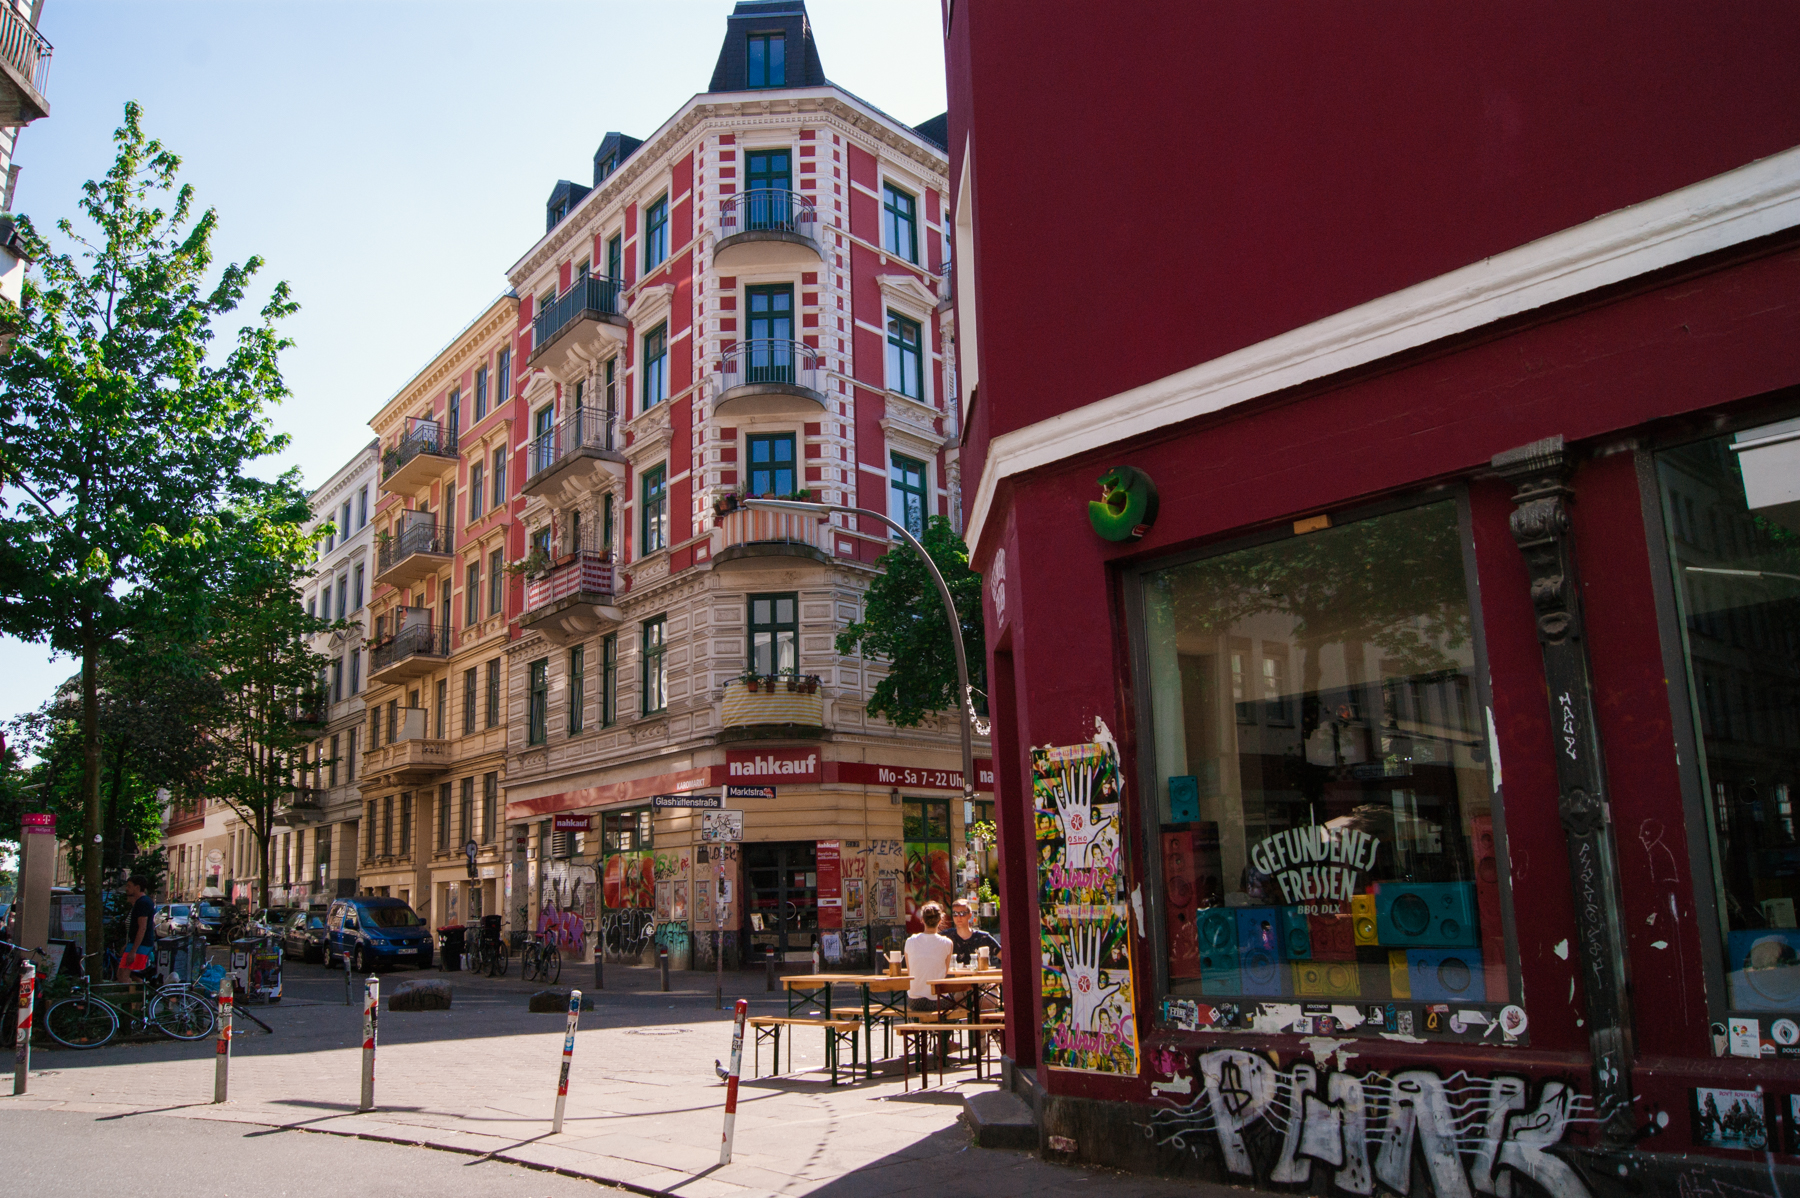 Hamburg: St. Pauli, Reeperbahn and Sternschanze by foot - .·*The Lovely Coconut*·.